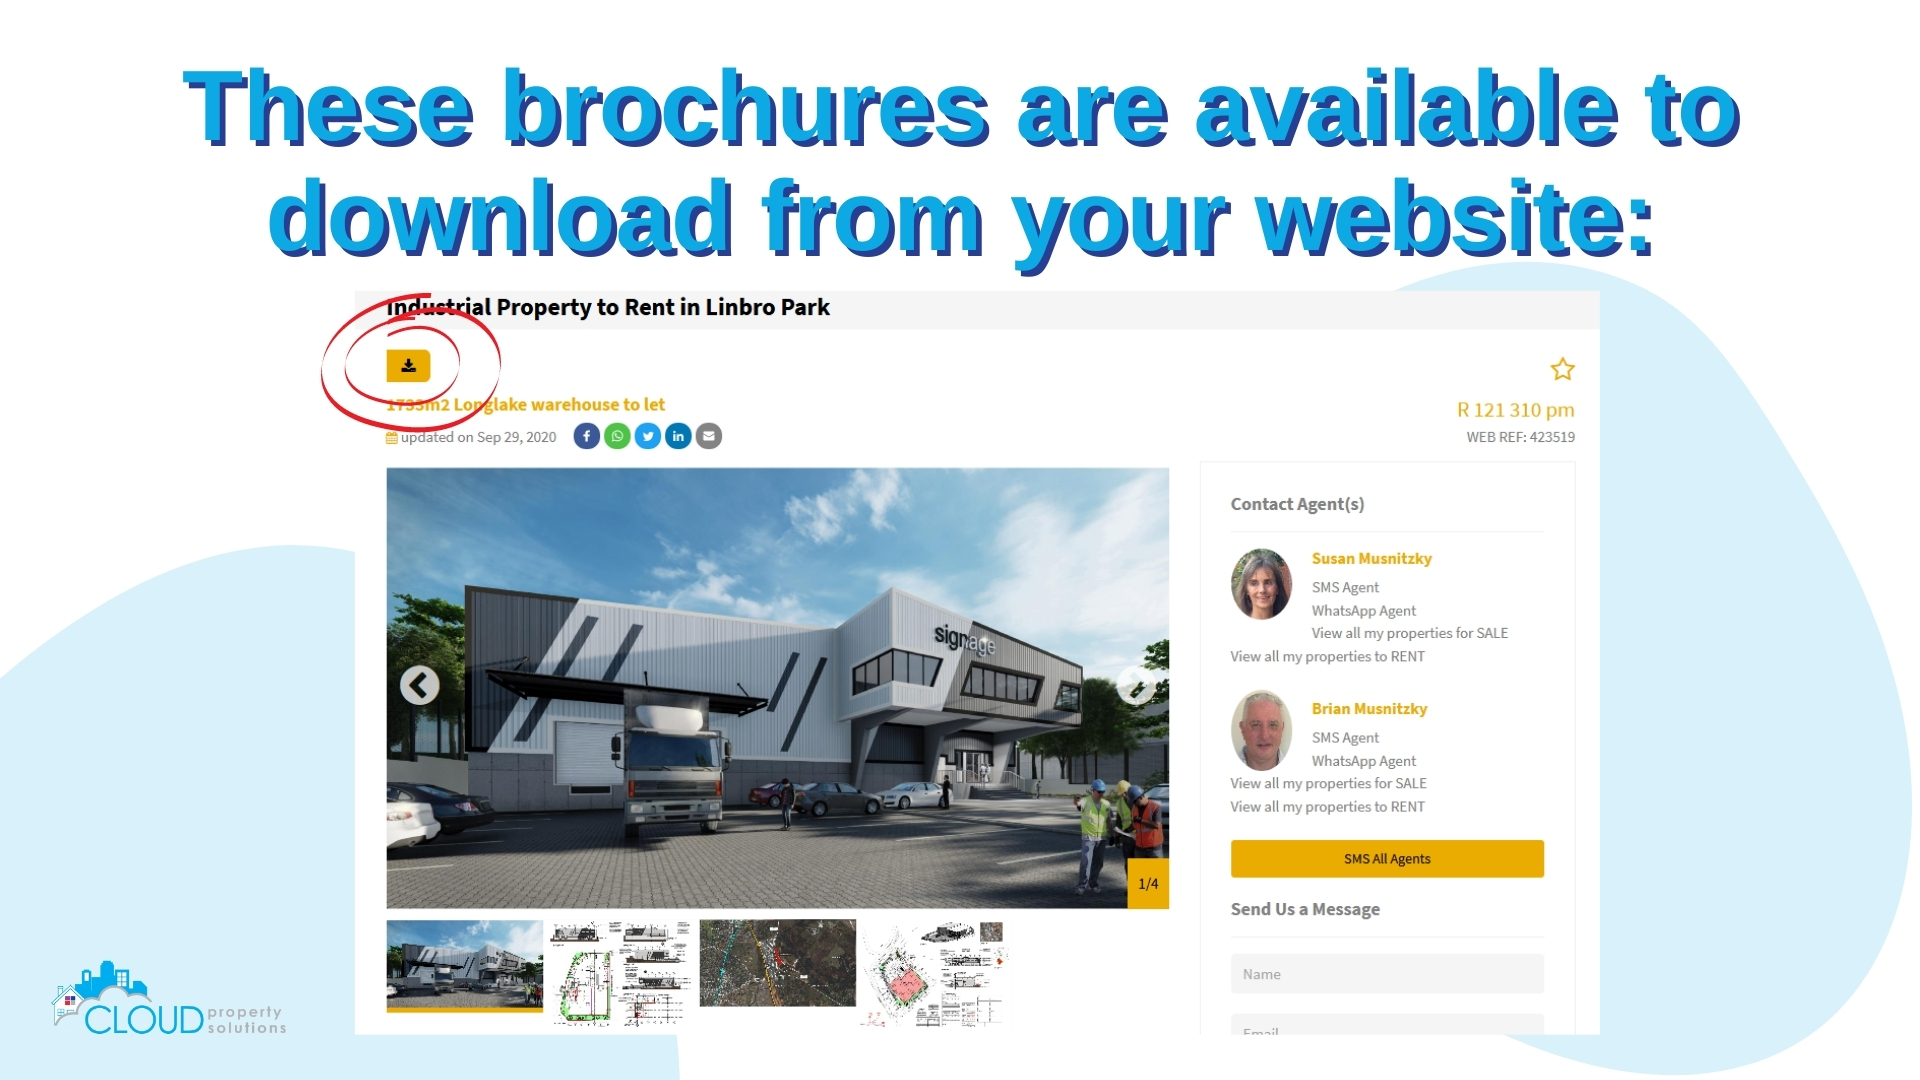 Brochures can be downloaded from your website on the listing info screens.